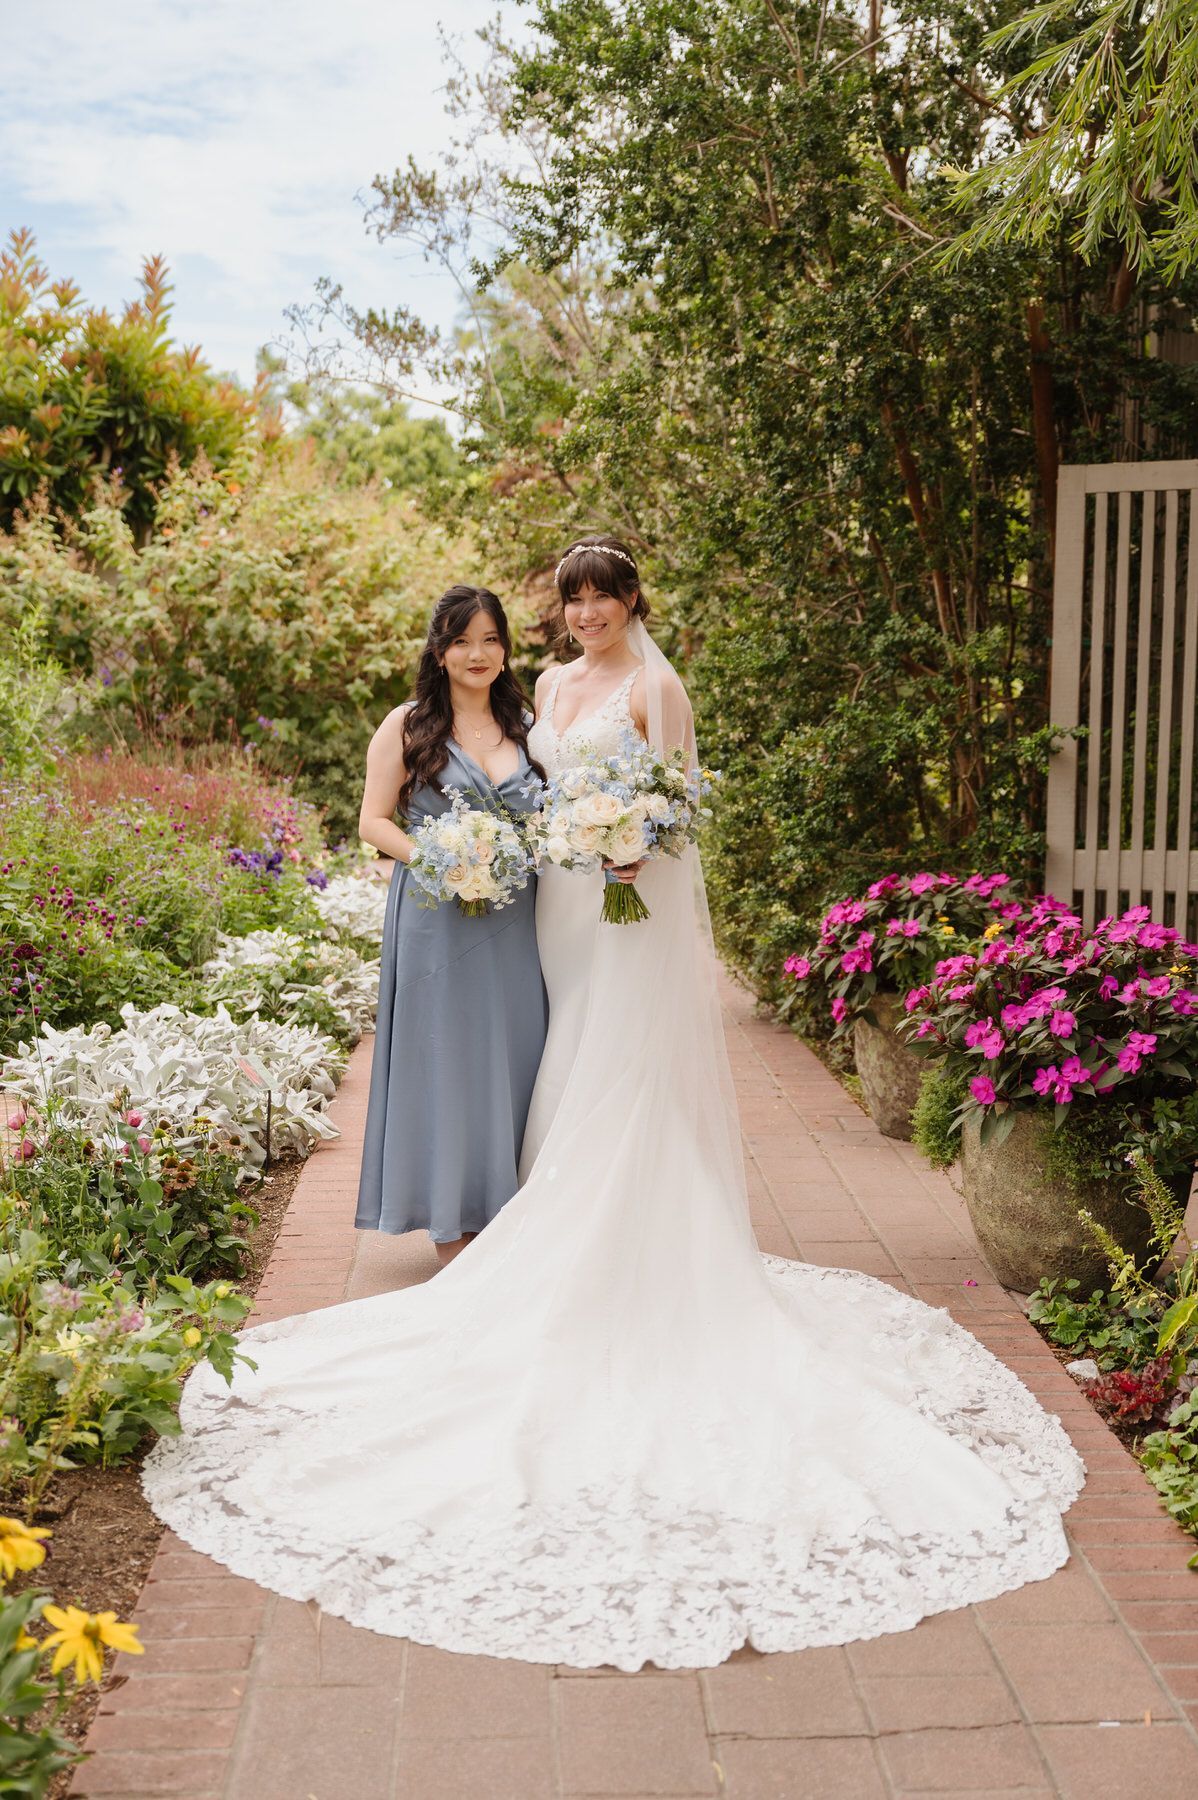 A bride and her bridesmaid are posing for a picture in a garden.